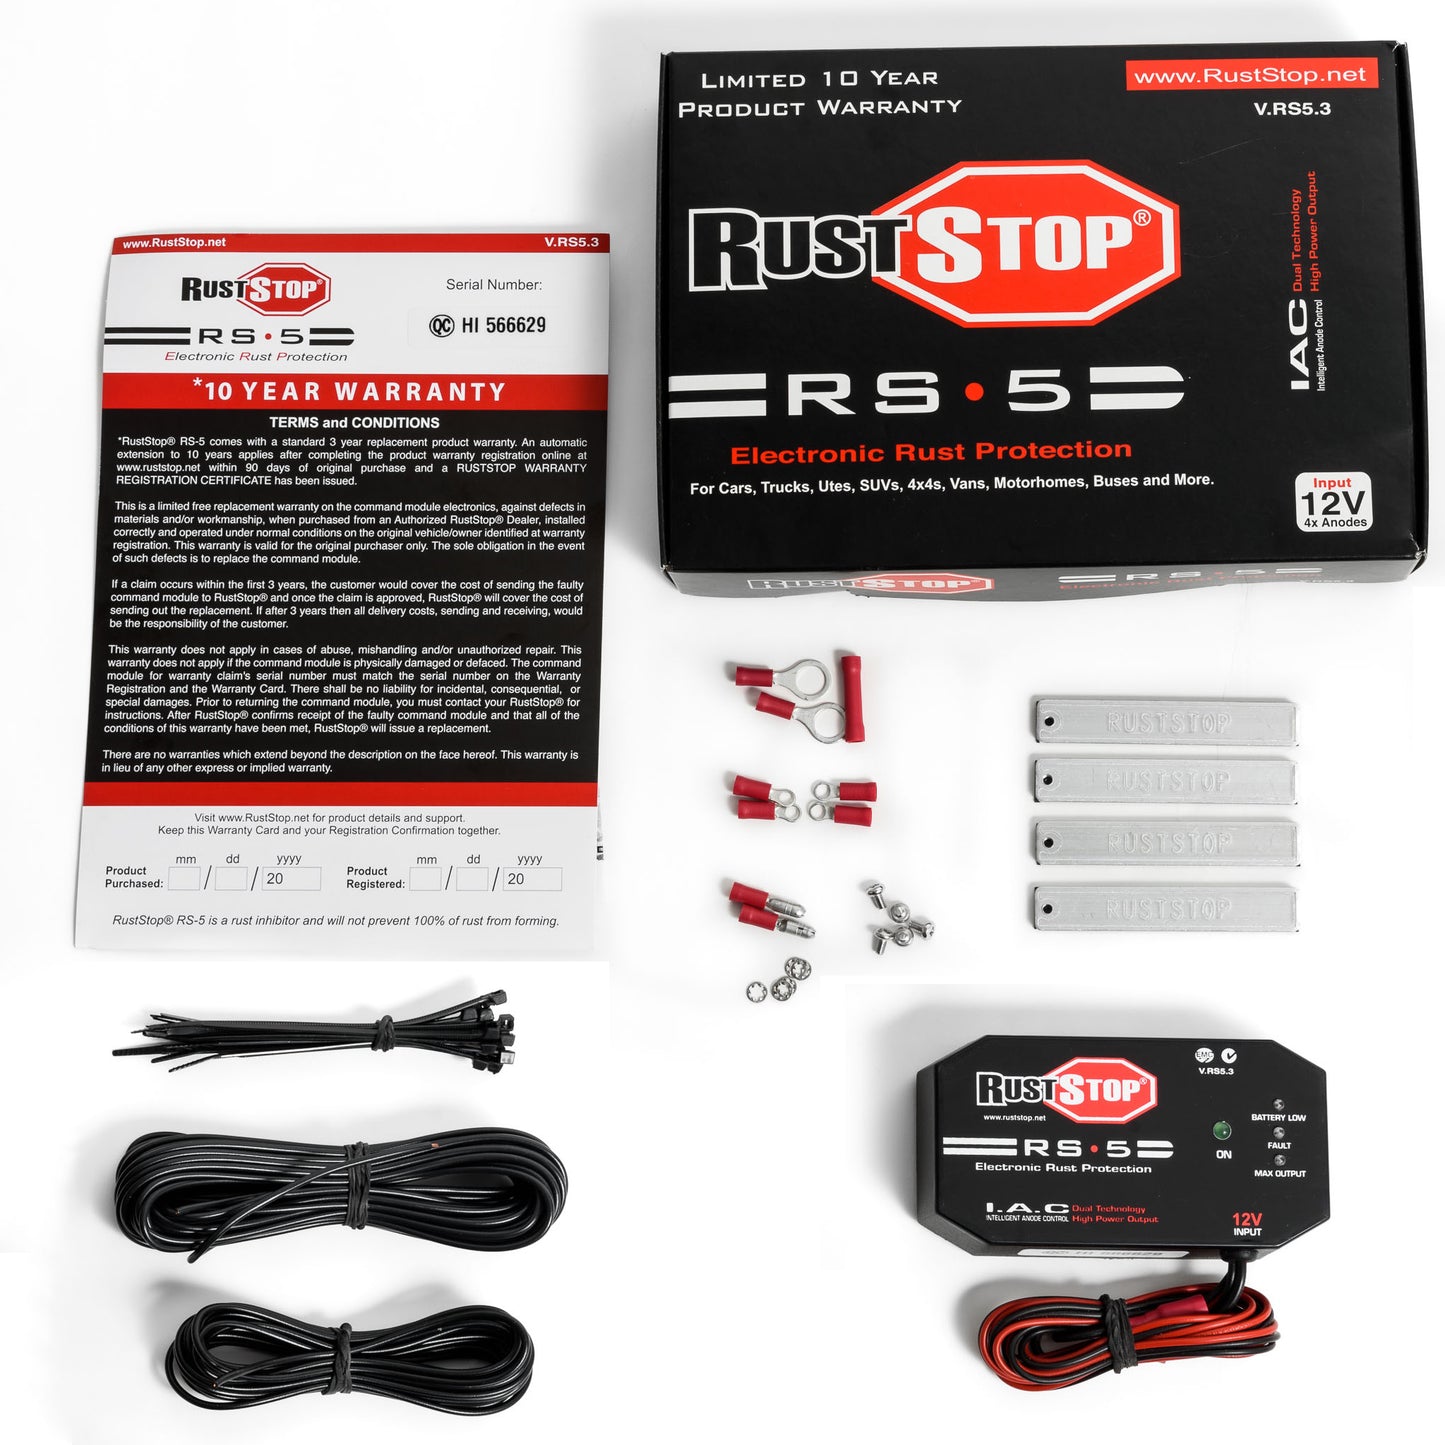 RustStop RS-5 (12V) Standard Electronic Rust Protection